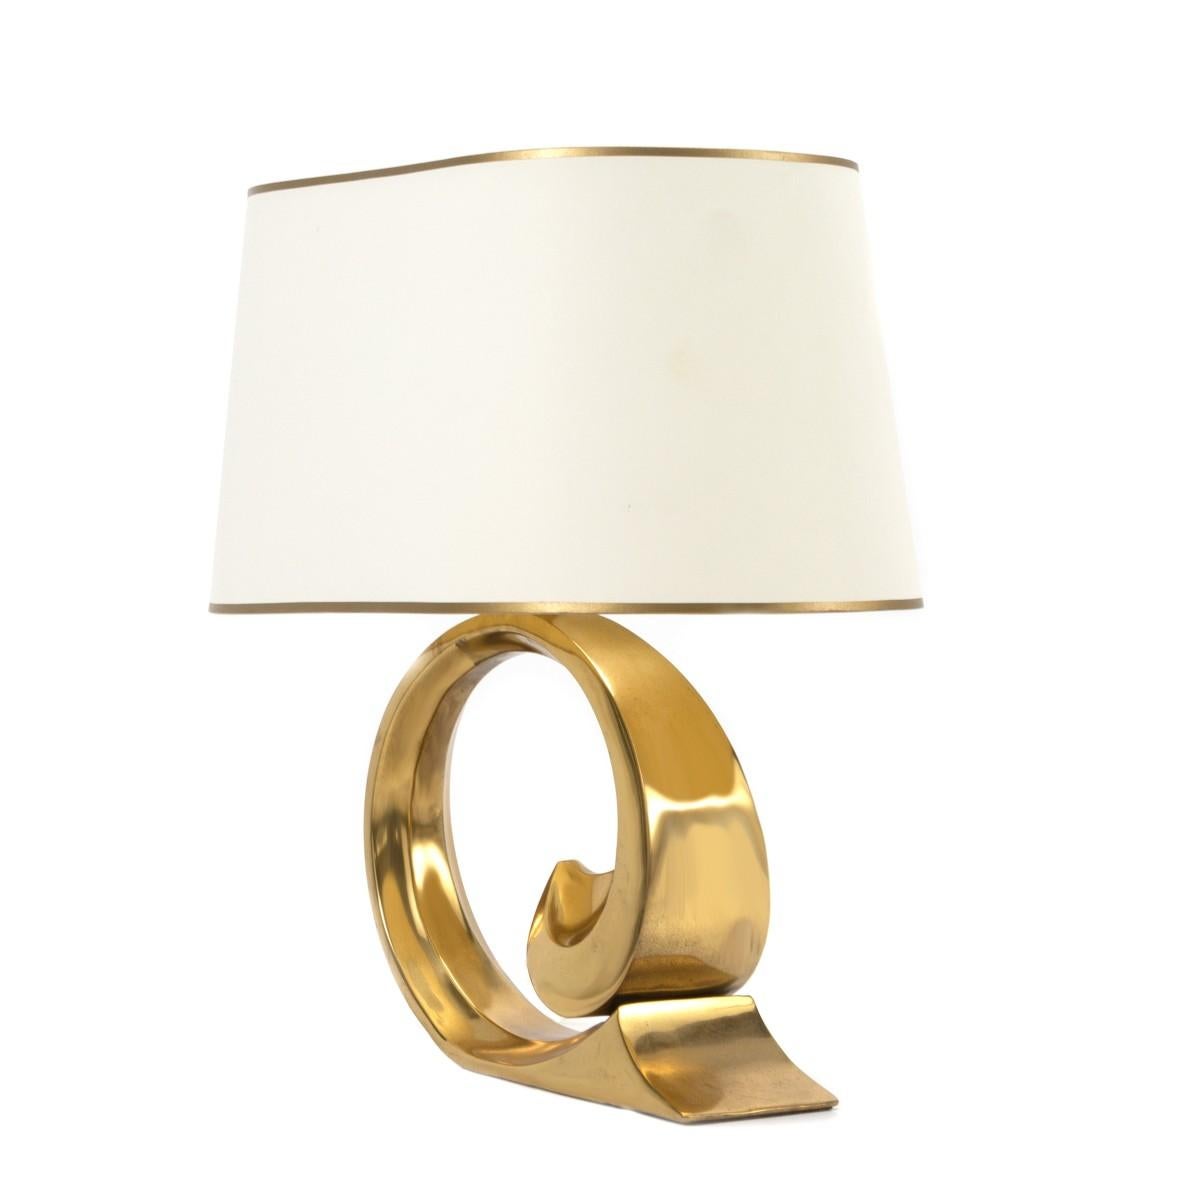 A vintage polished brass table lamp by Pirre Cardin, USA, circa 1970. Includes a custom oval-shaped shade with gold trim.

Dimensions of lamp base: 12 inches L × 4.5 inches W x 19.5 inches H
Dimensions of shade: 18 inches L x 11 inches H.